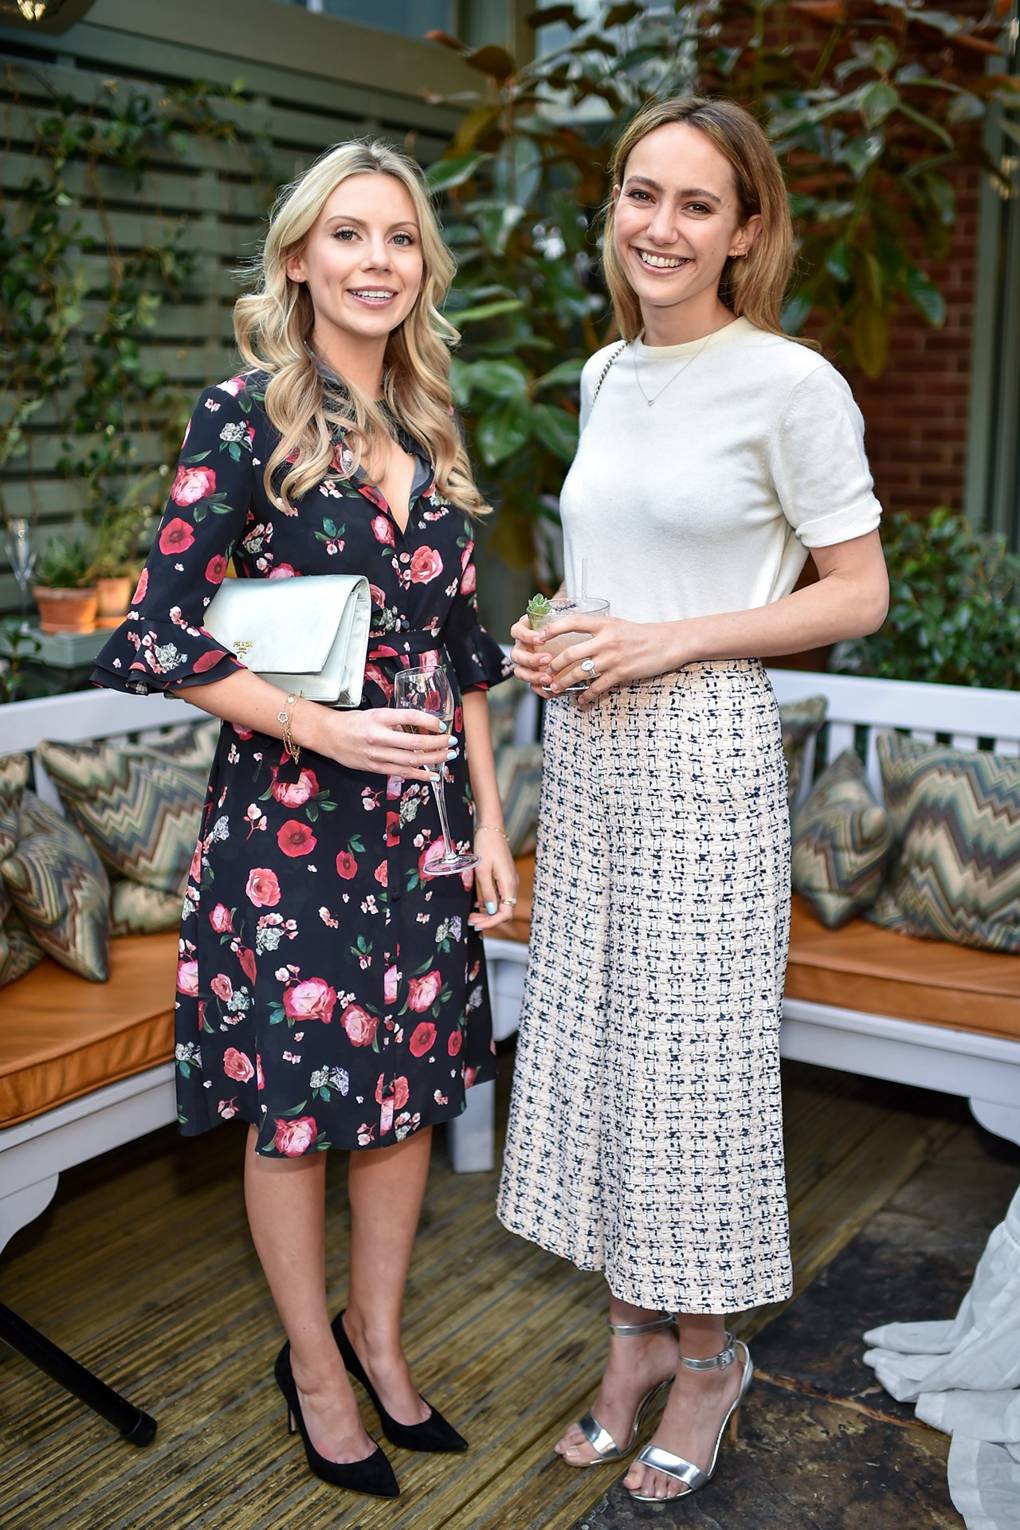 The Ivy Chelsea Garden Summer Party Lottie Moss Lady Violet Manners Tatler